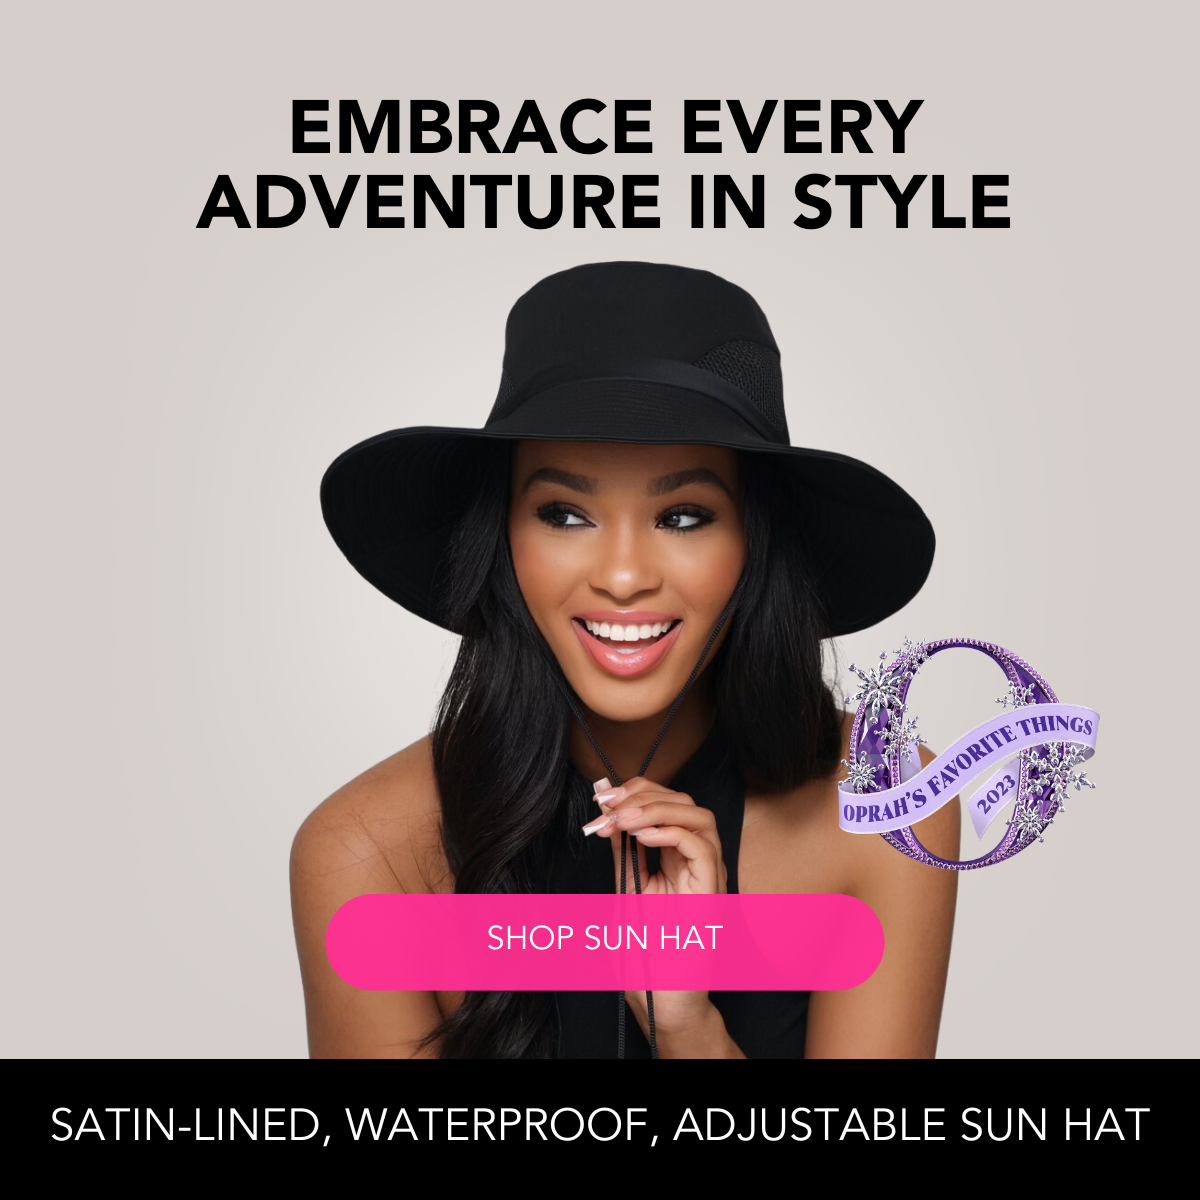 Blog - Stay Dry in Style: The Best Rain Hats for Men and Women